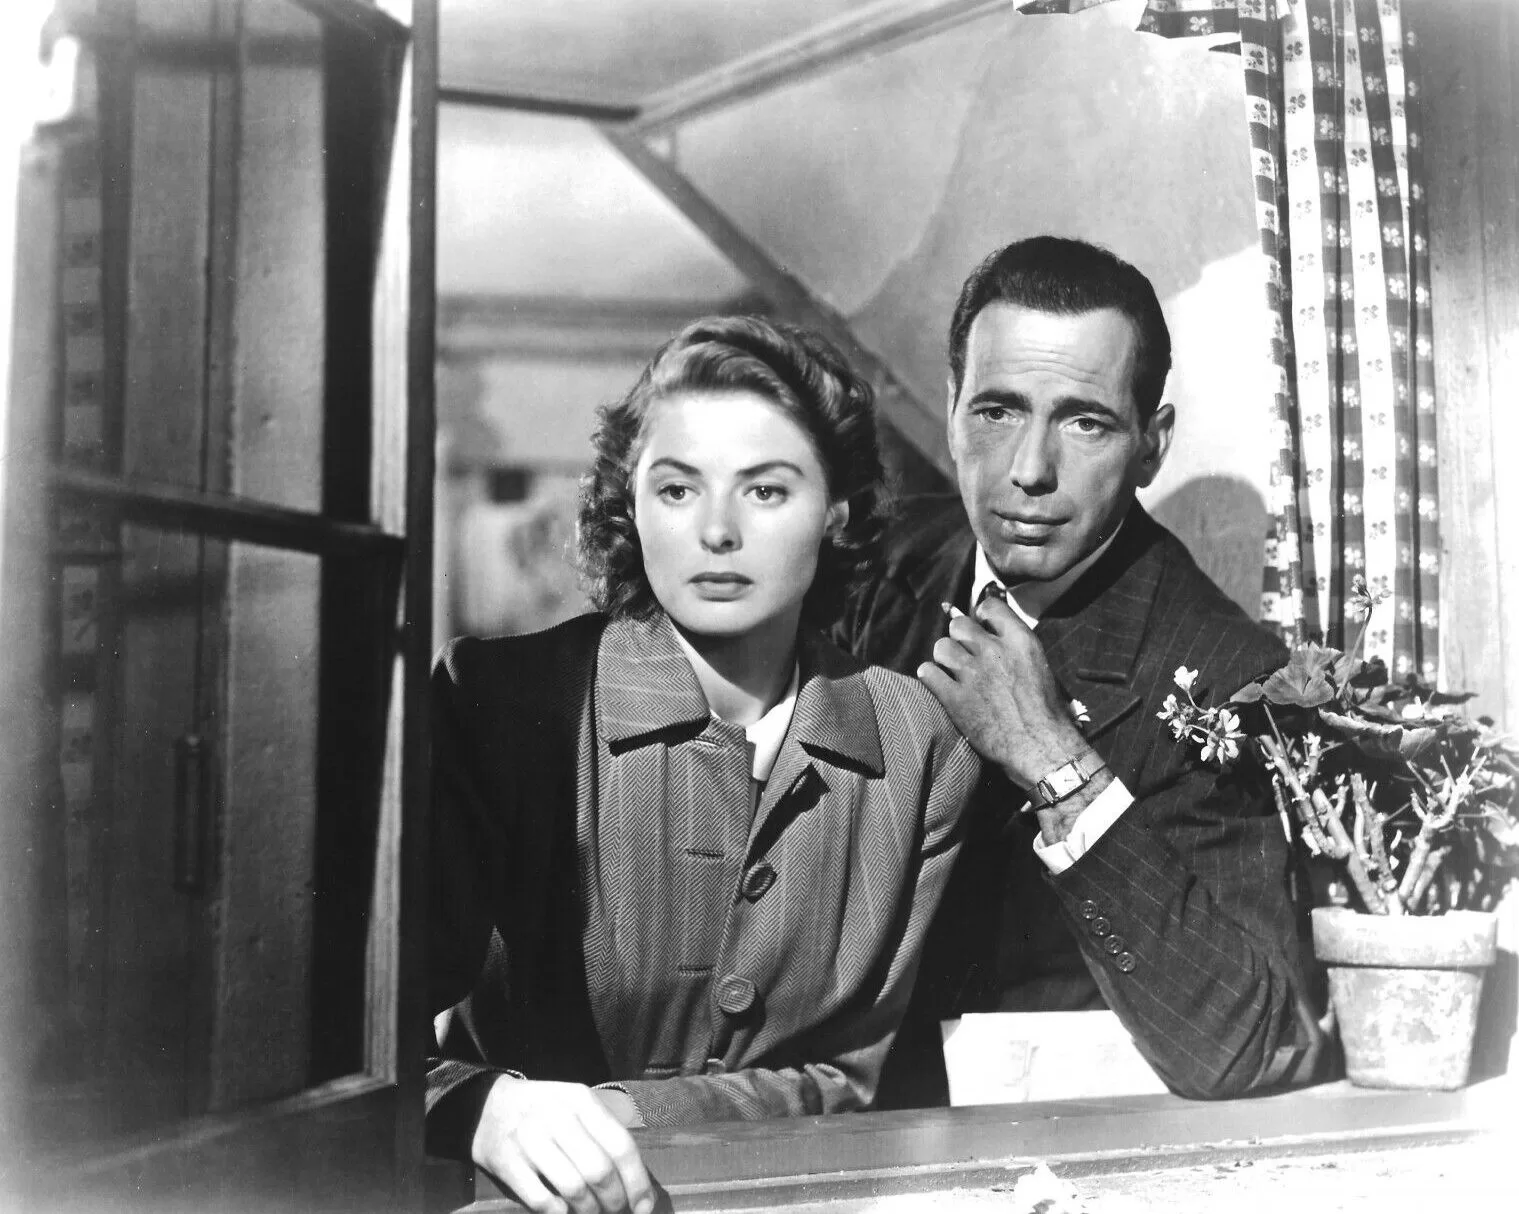 Image of a scene from the movie Casablanca is an example for how to find a good movie to watch by creating a personal movie list.